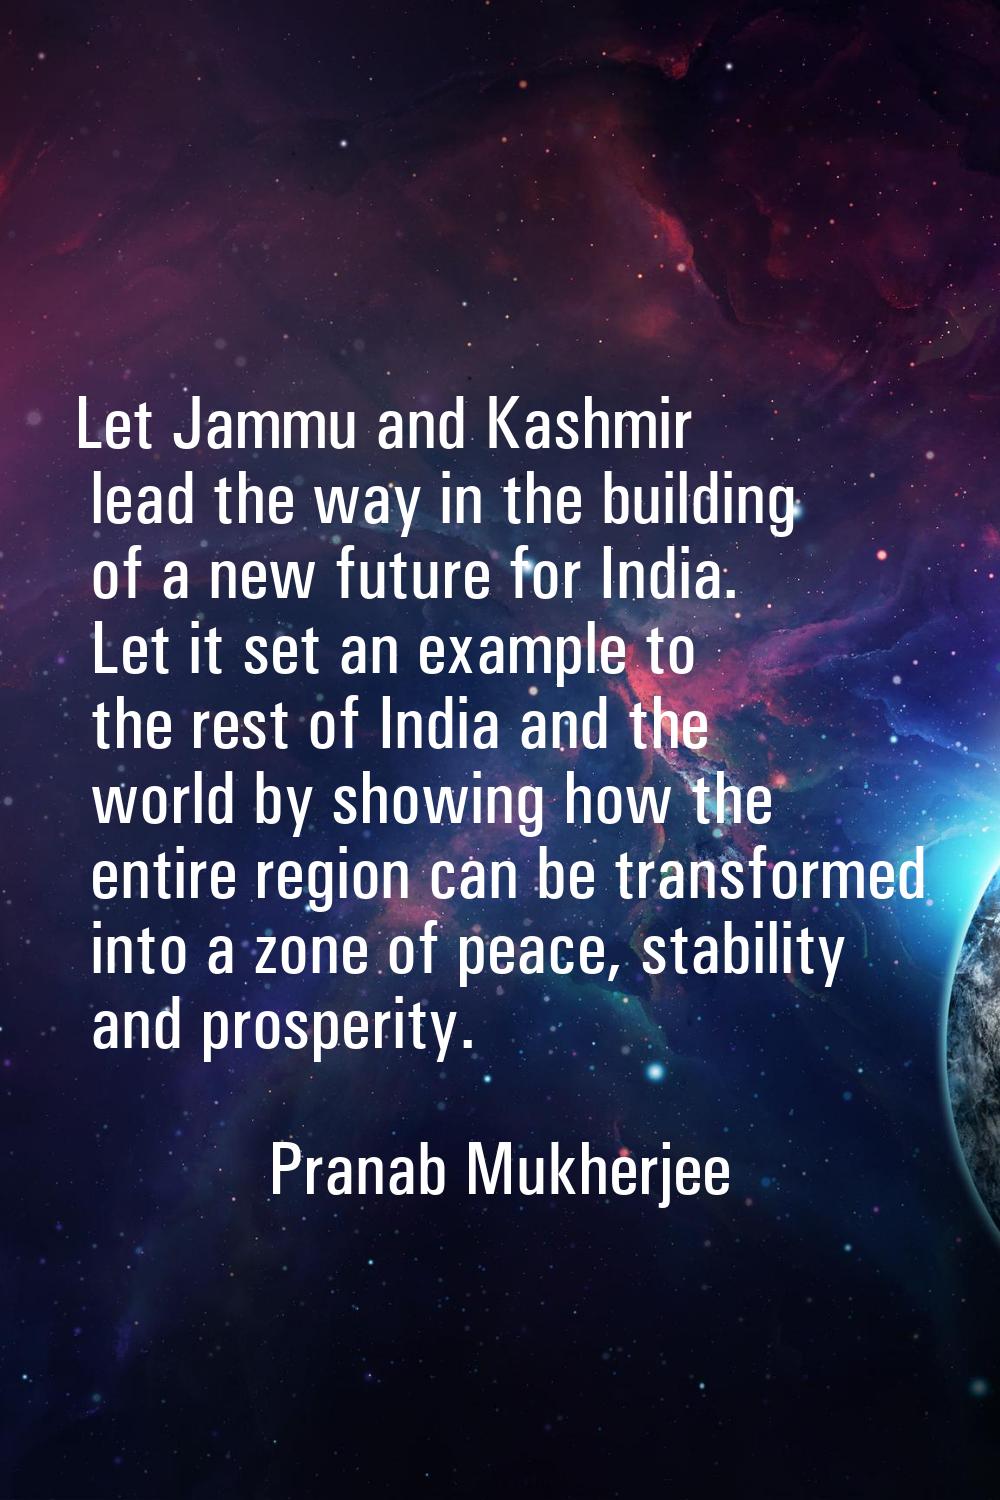 Let Jammu and Kashmir lead the way in the building of a new future for India. Let it set an example